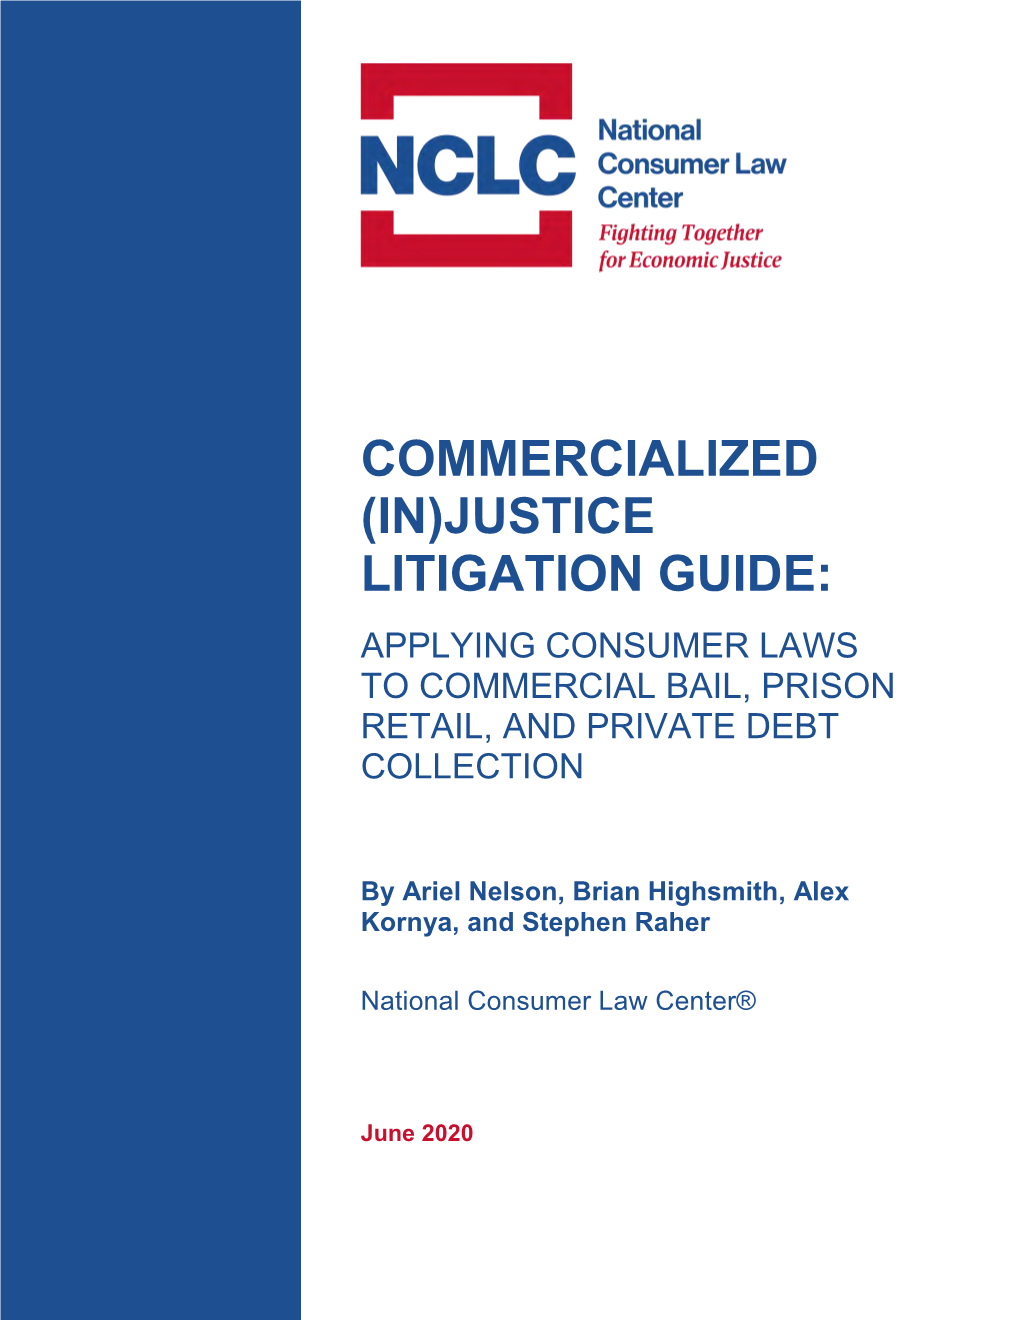 (In)Justice Litigation Guide: Applying Consumer Laws to Commercial Bail, Prison Retail, and Private Debt Collection